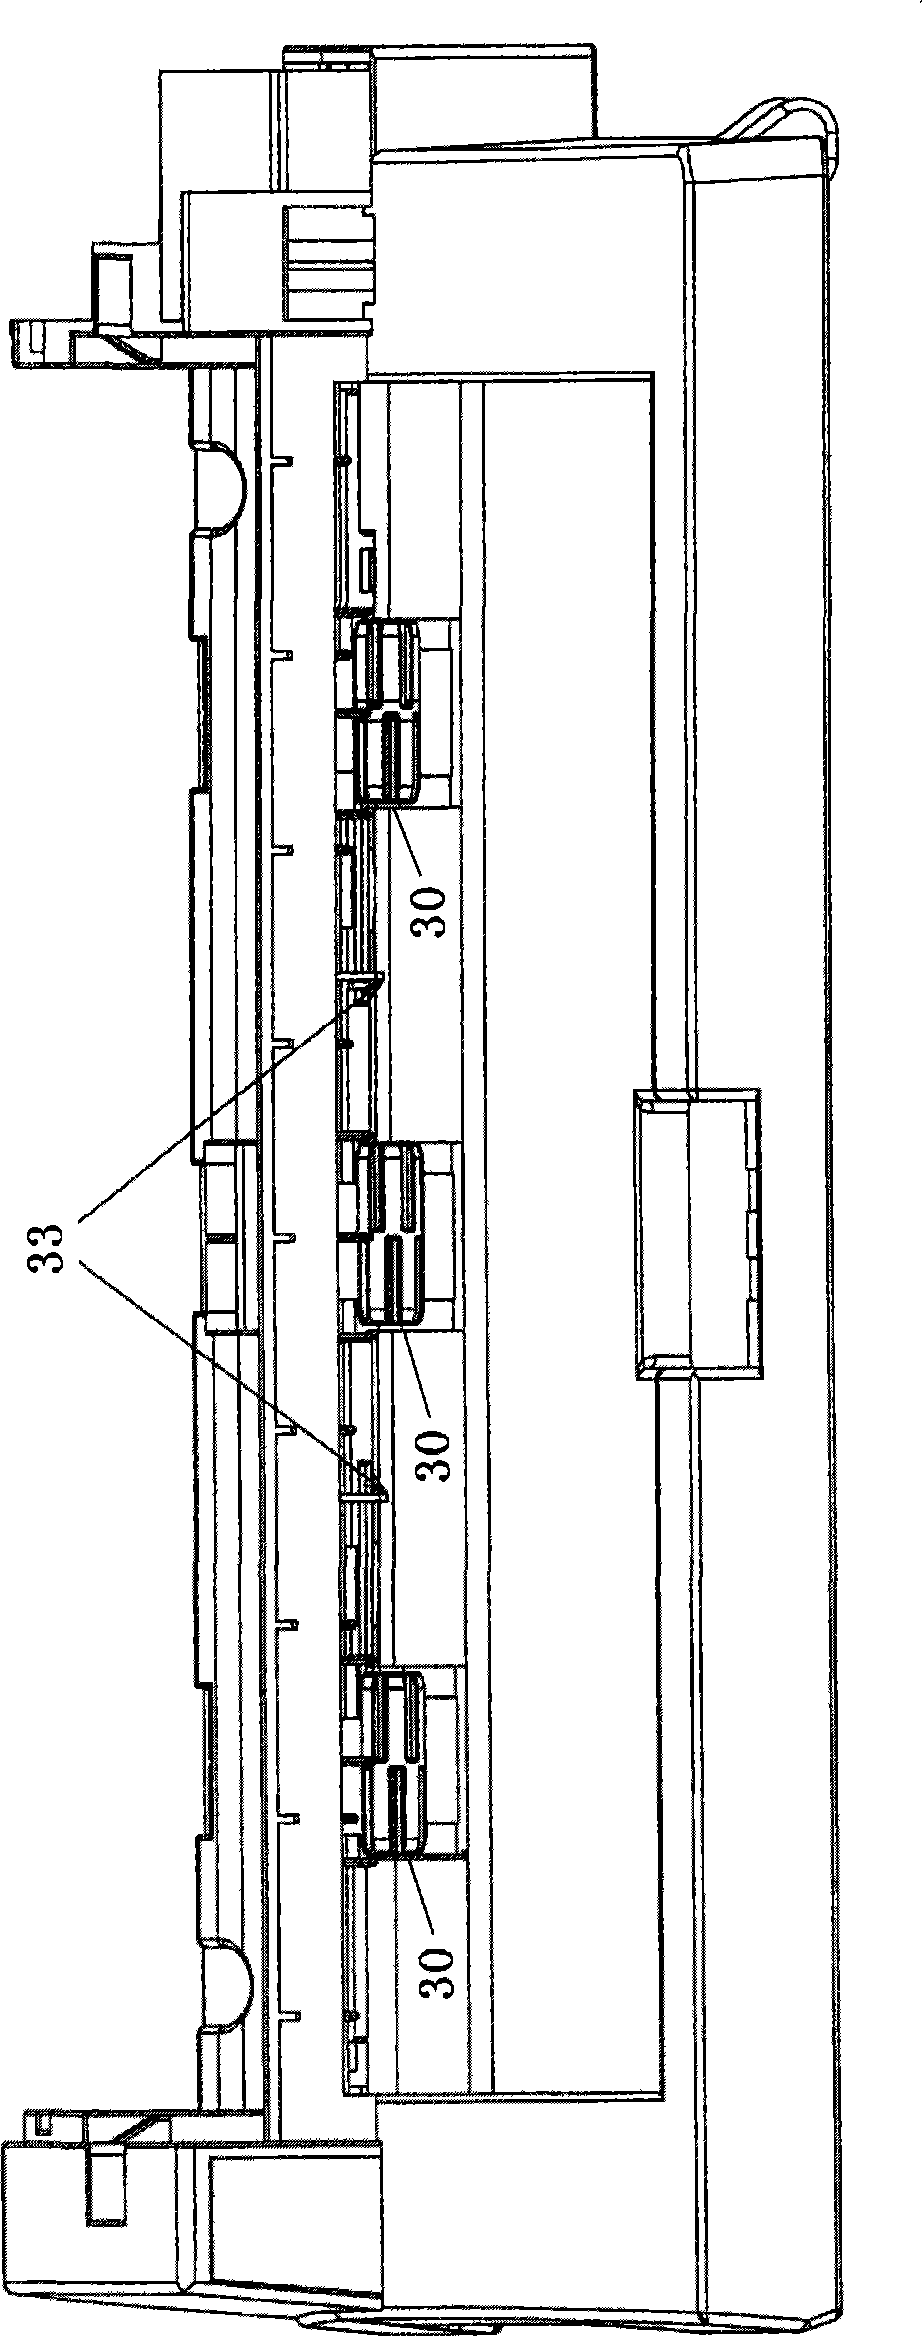 Recording sheet discharge device